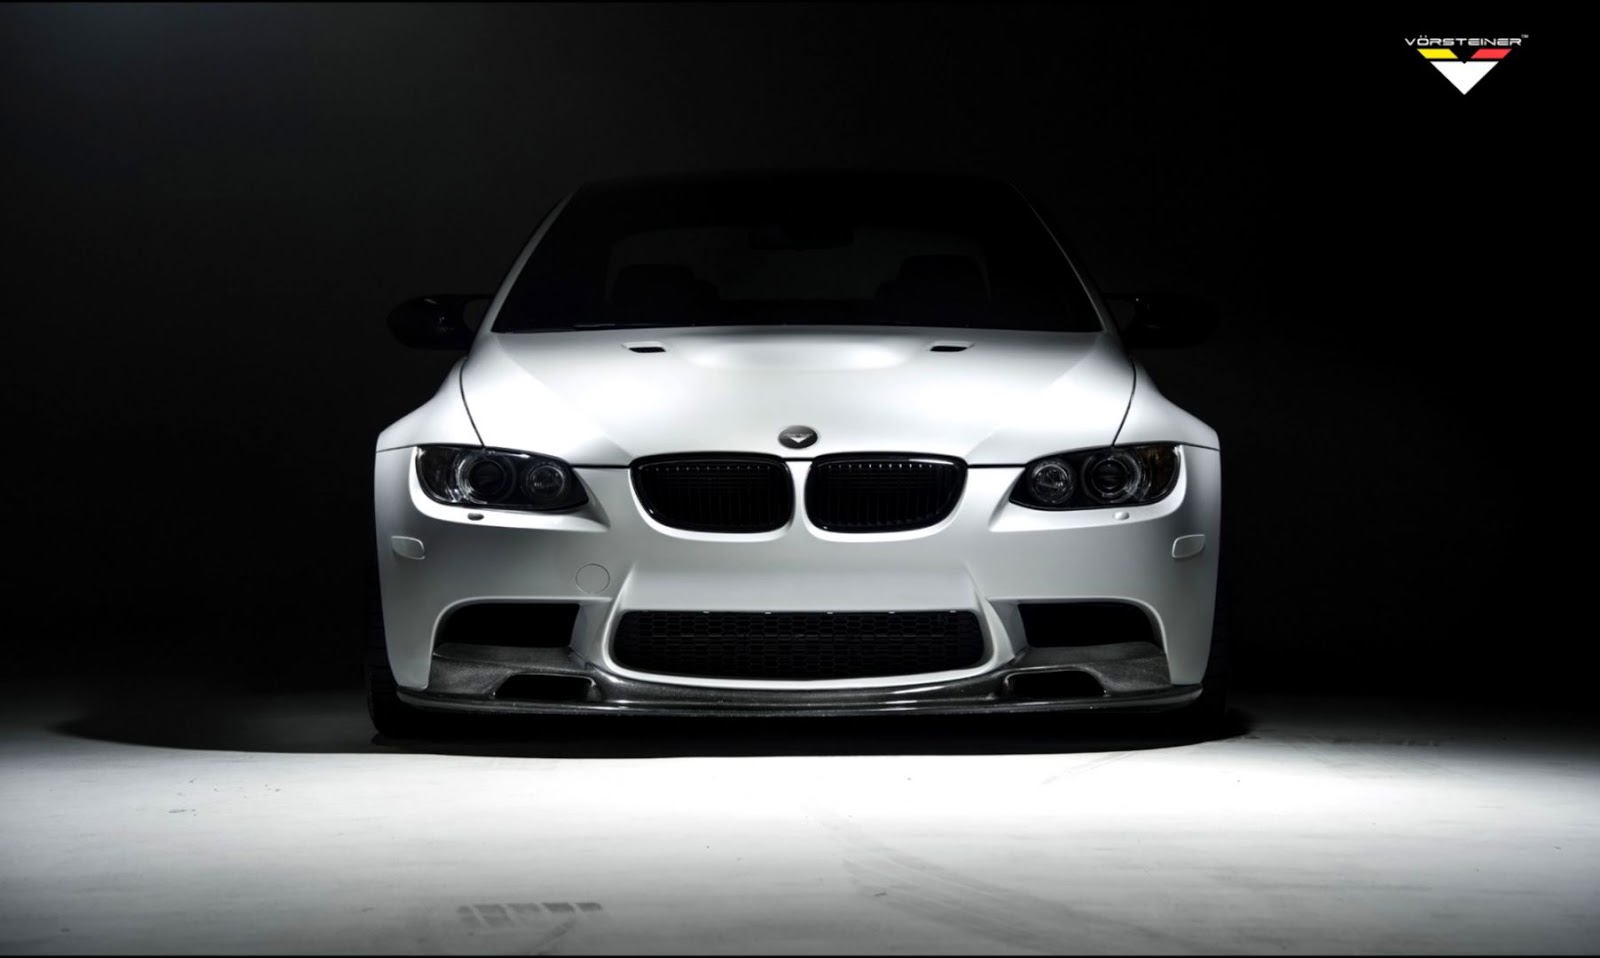 Free Download Bmw M3 Wallpaper White Car All In One Wallpapers 1600x958 For Your Desktop Mobile Tablet Explore 36 Bmw M3 2019 Wallpapers Bmw M3 2019 Wallpapers Bmw M3 Wallpapers Bmw M3 Wallpaper